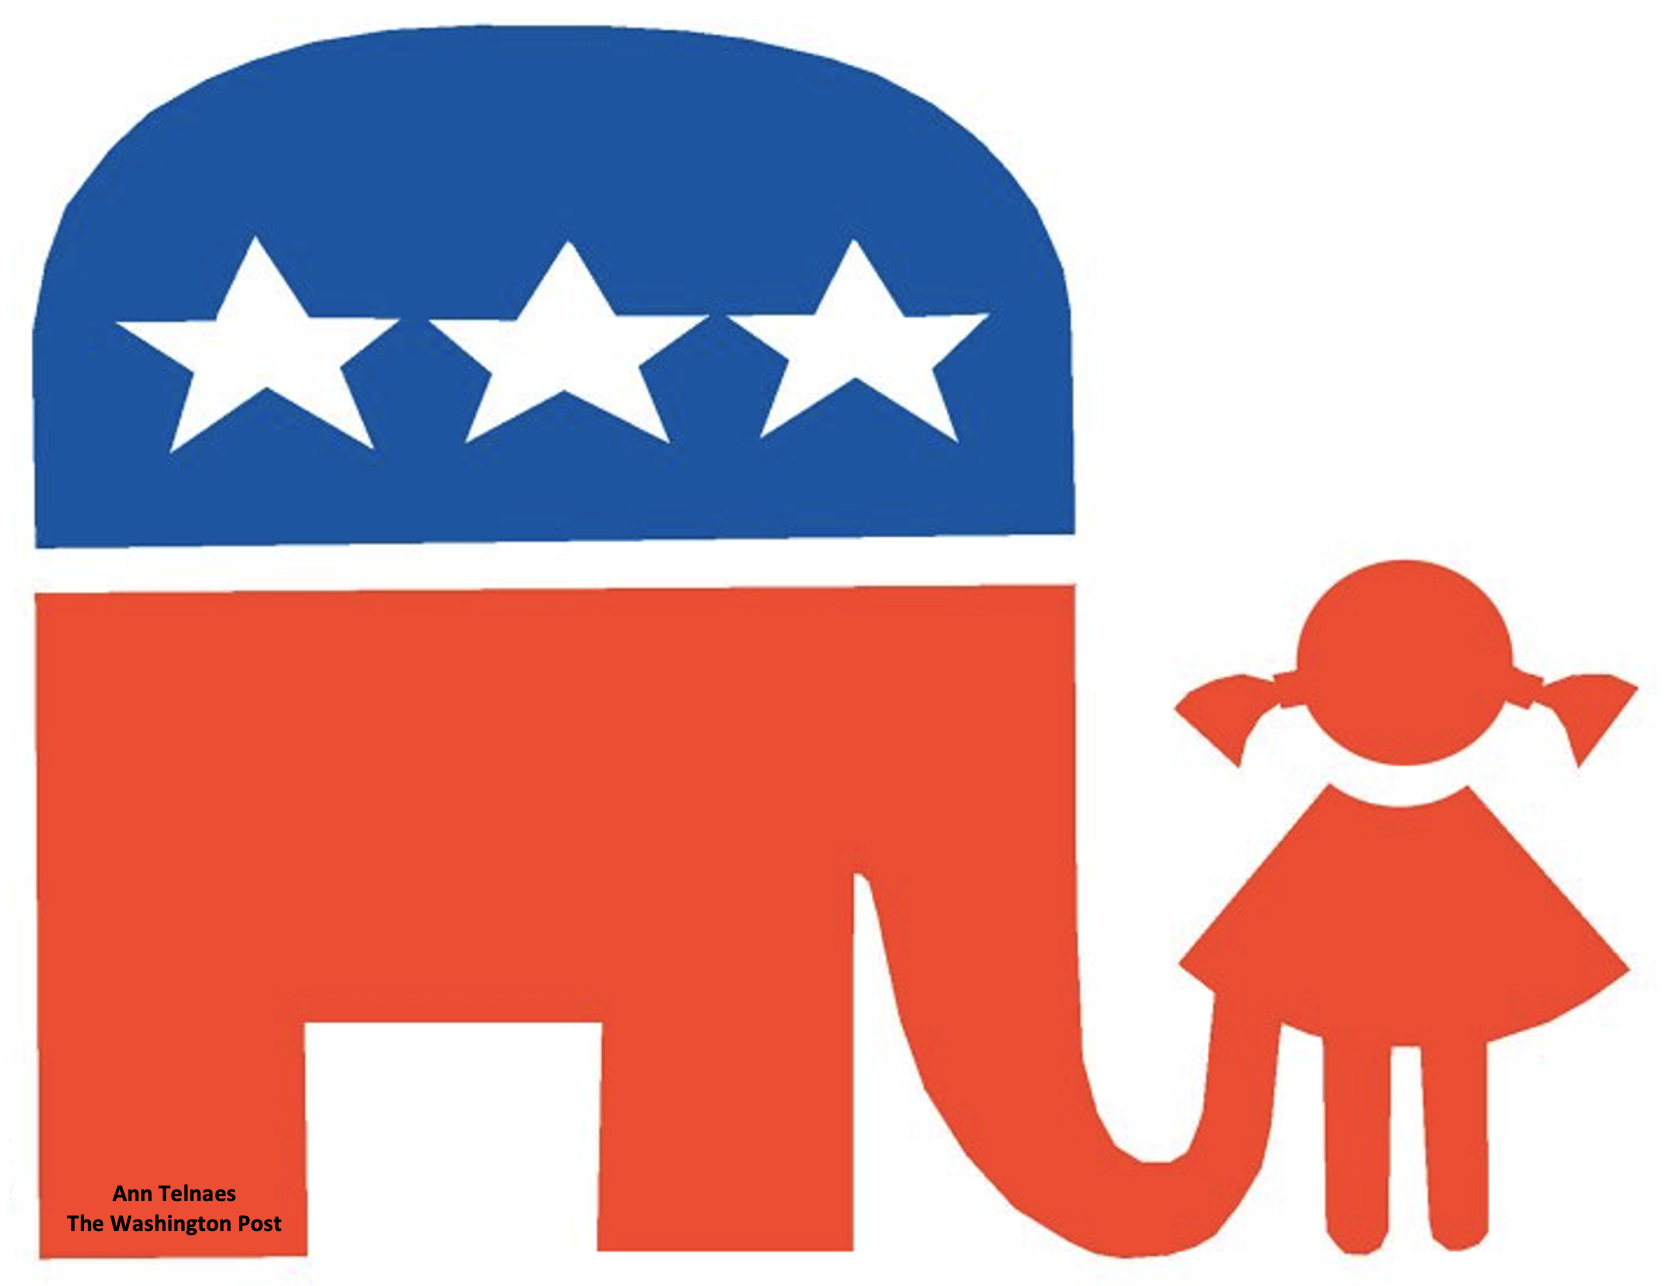 Ann Telnaes cartoon show how GOP and Republicans deny women their abortion rights